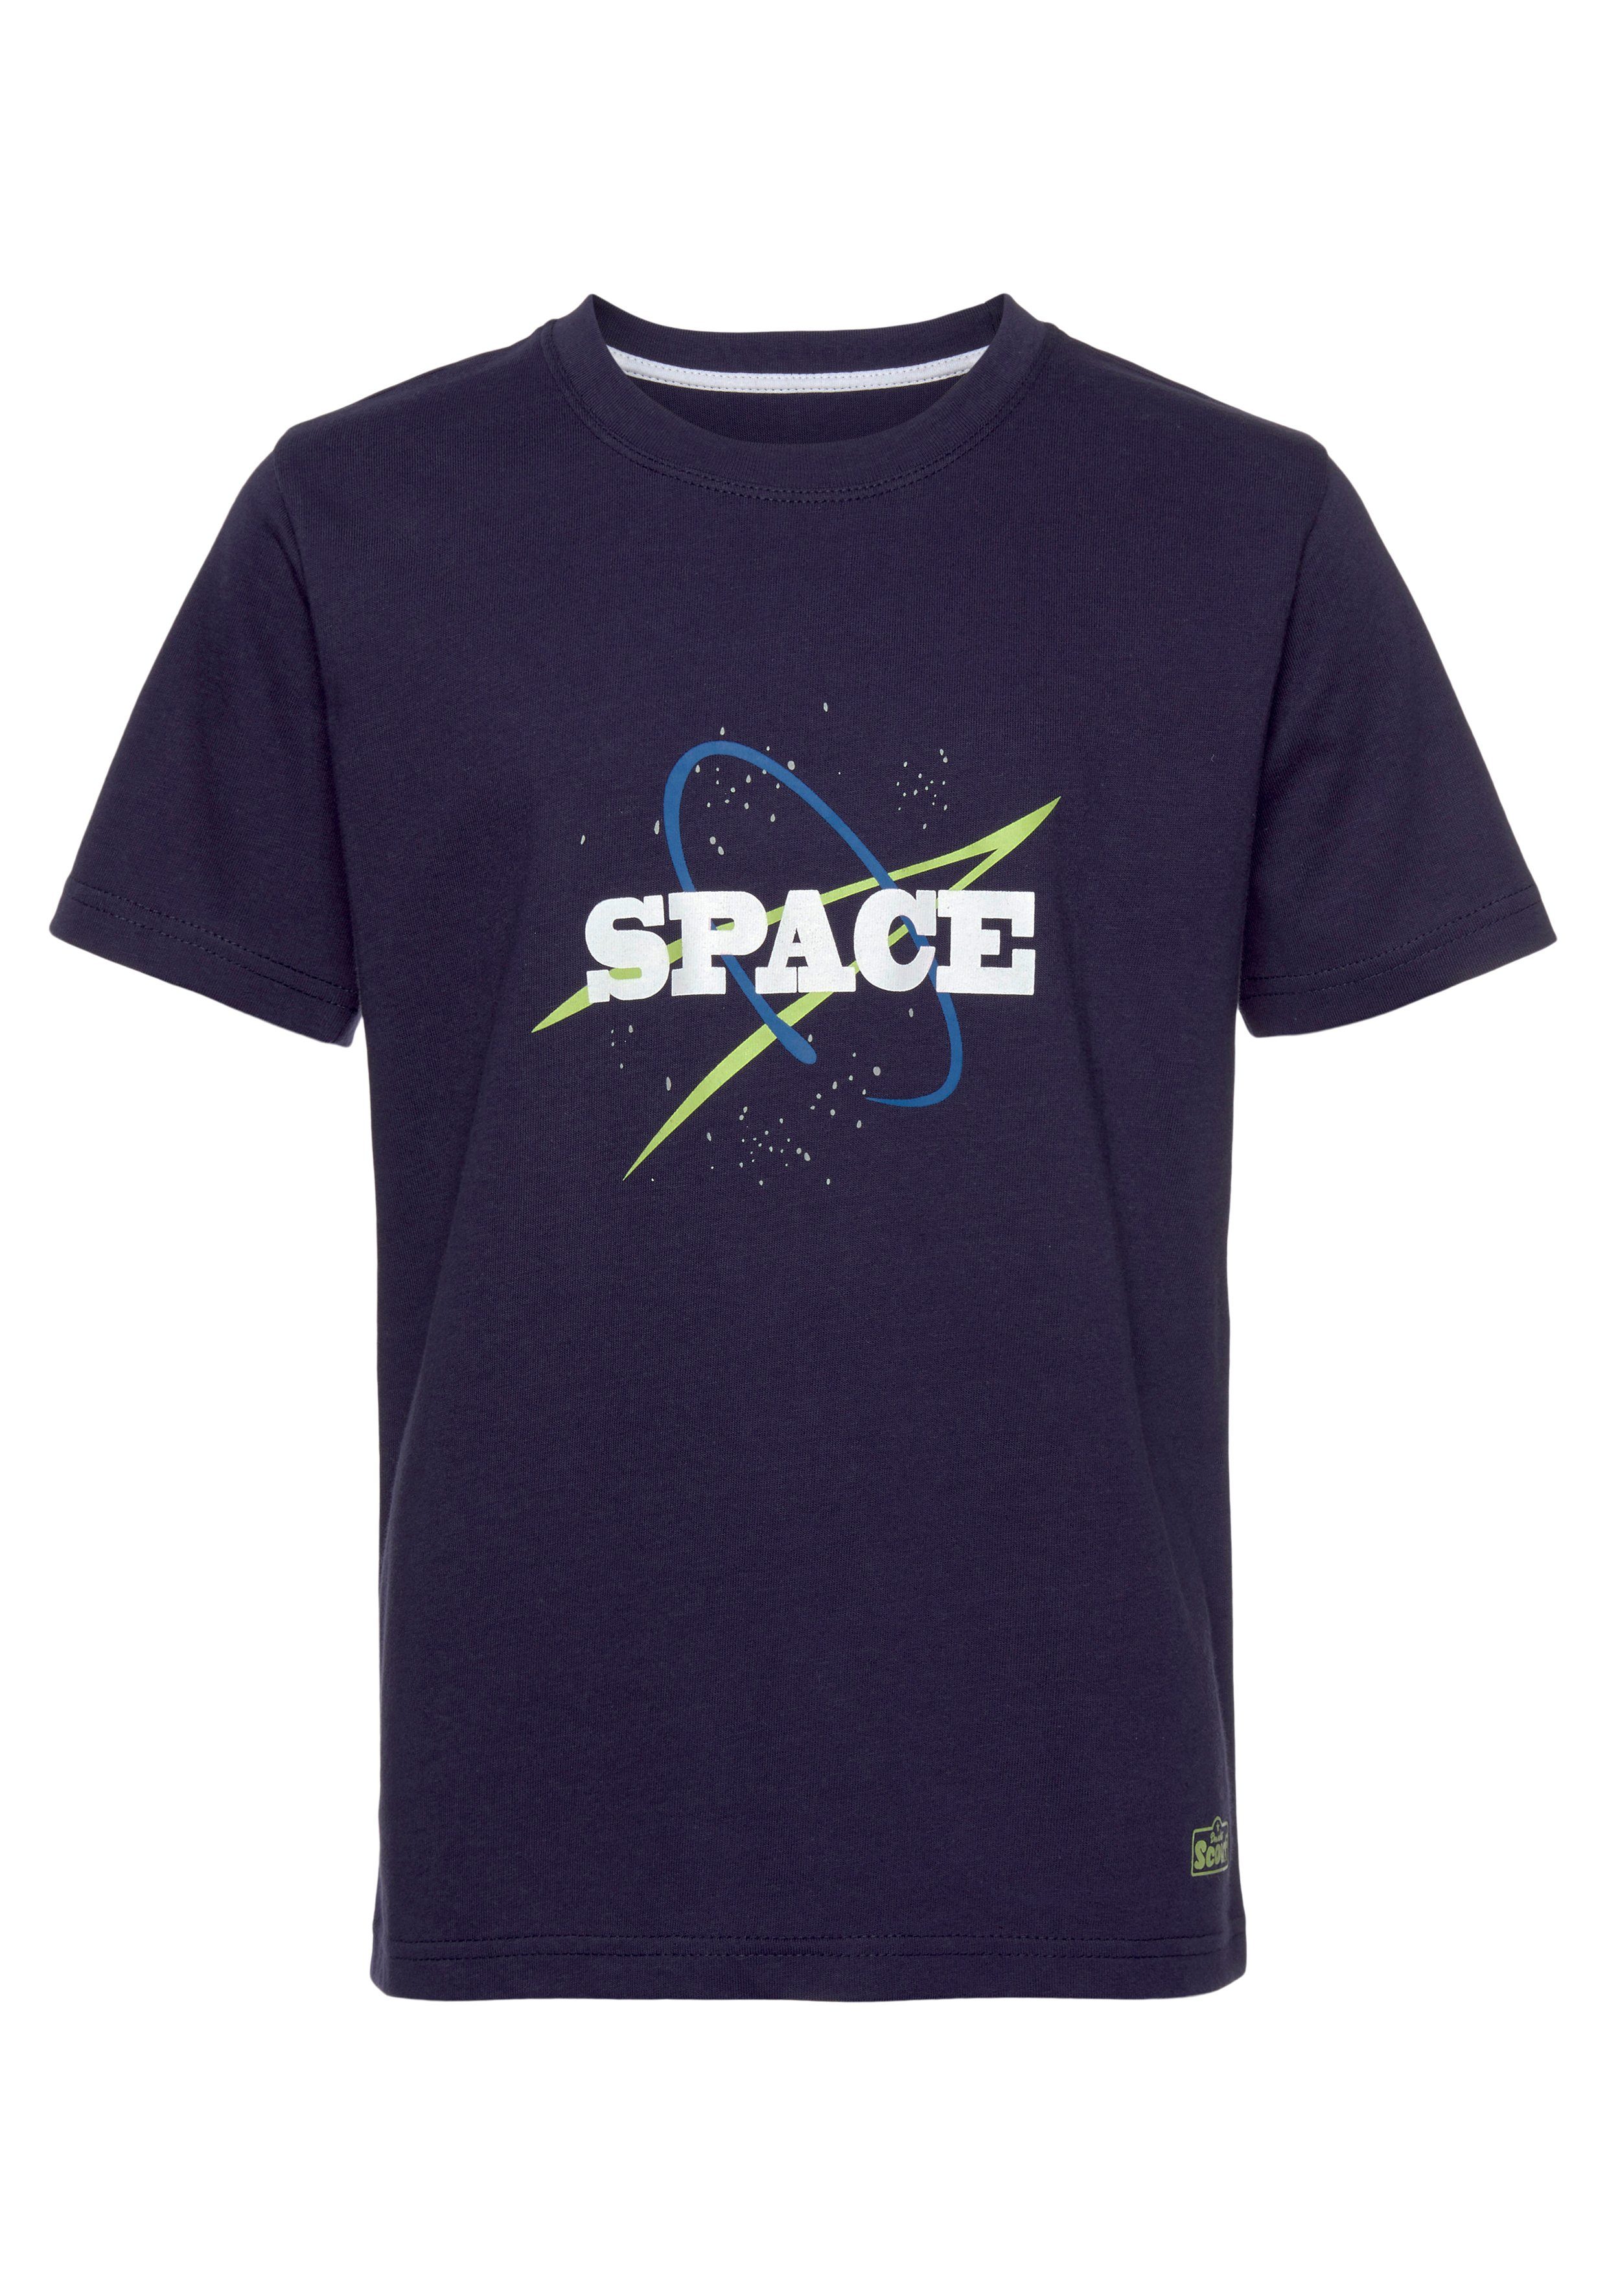 2er-Pack) aus Scout Bio-Baumwolle T-Shirt SPACE (Packung,